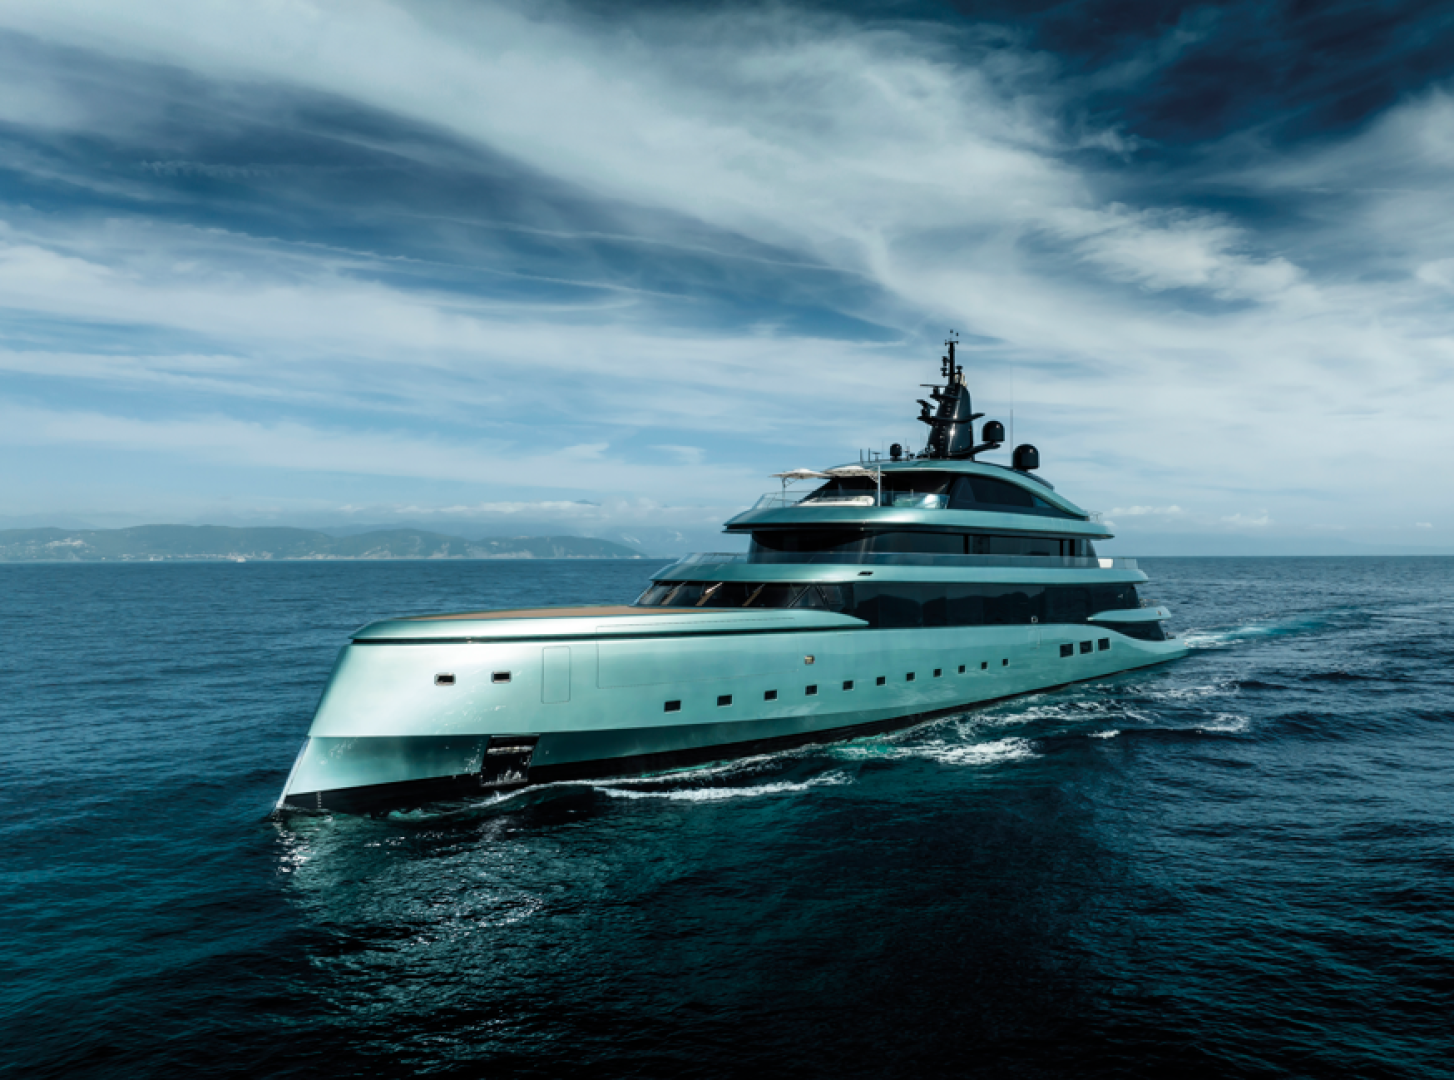 Admiral Kenshō conquers the “Best interior design, motor yachts 500GT and above” Award of the prestigious Boat International Design & Innovation Awards 2023